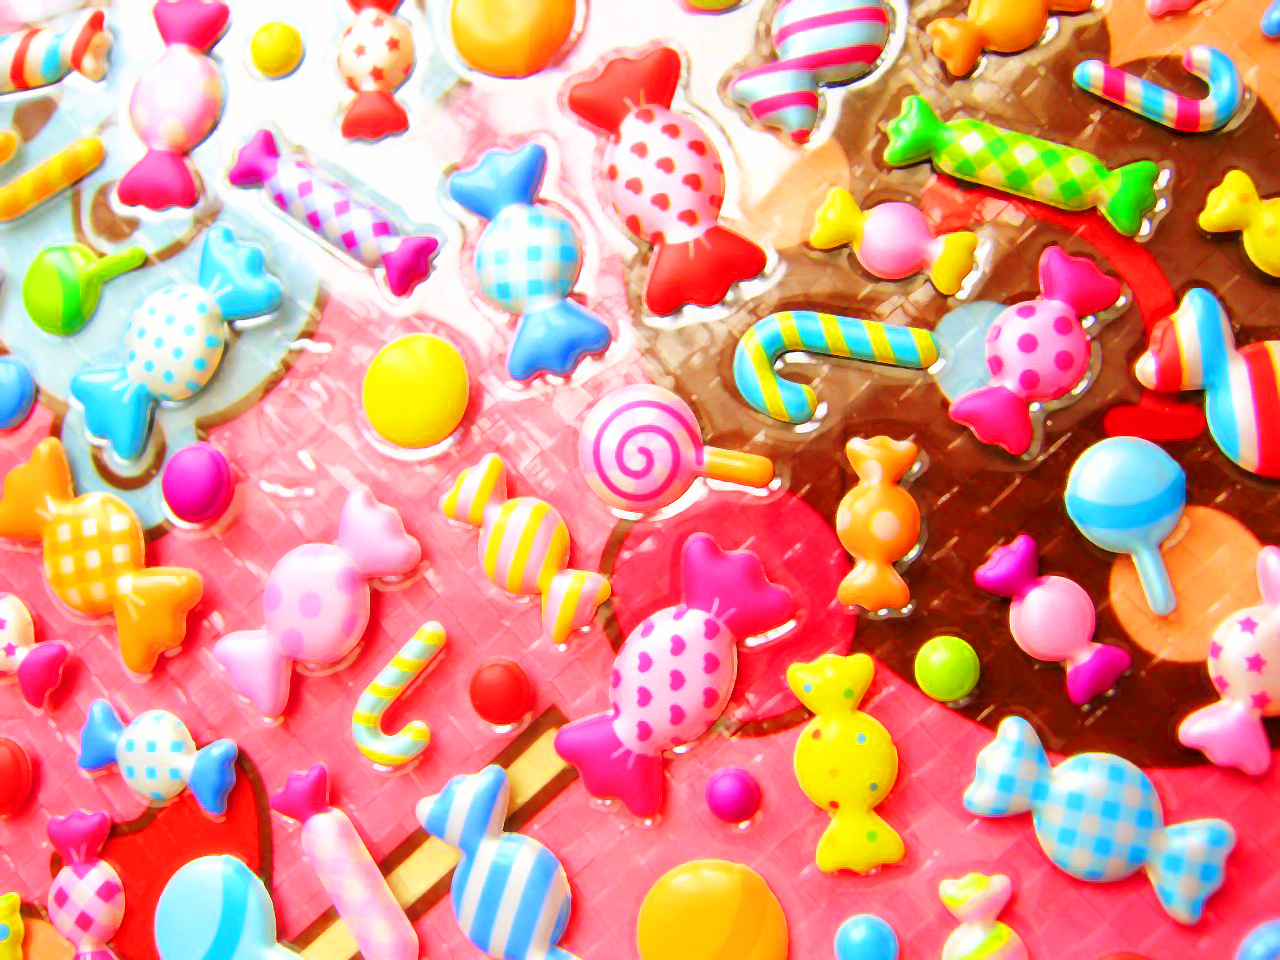 Candy Wallpapers, Free Desktop Backgrounds - Wallpaper Path